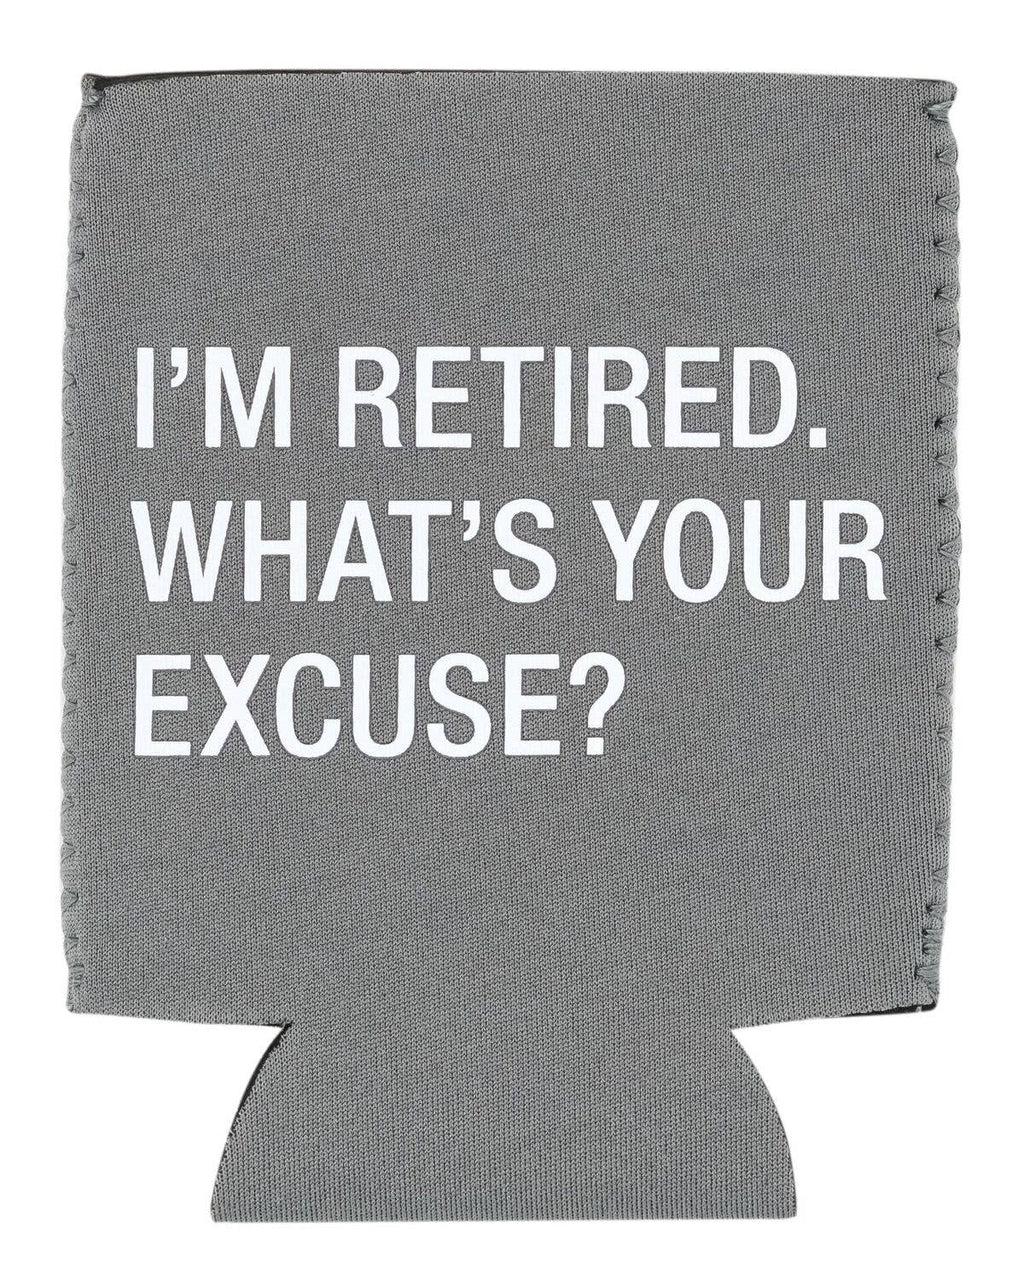 About Face Designs - What's Your Excuse Koozie